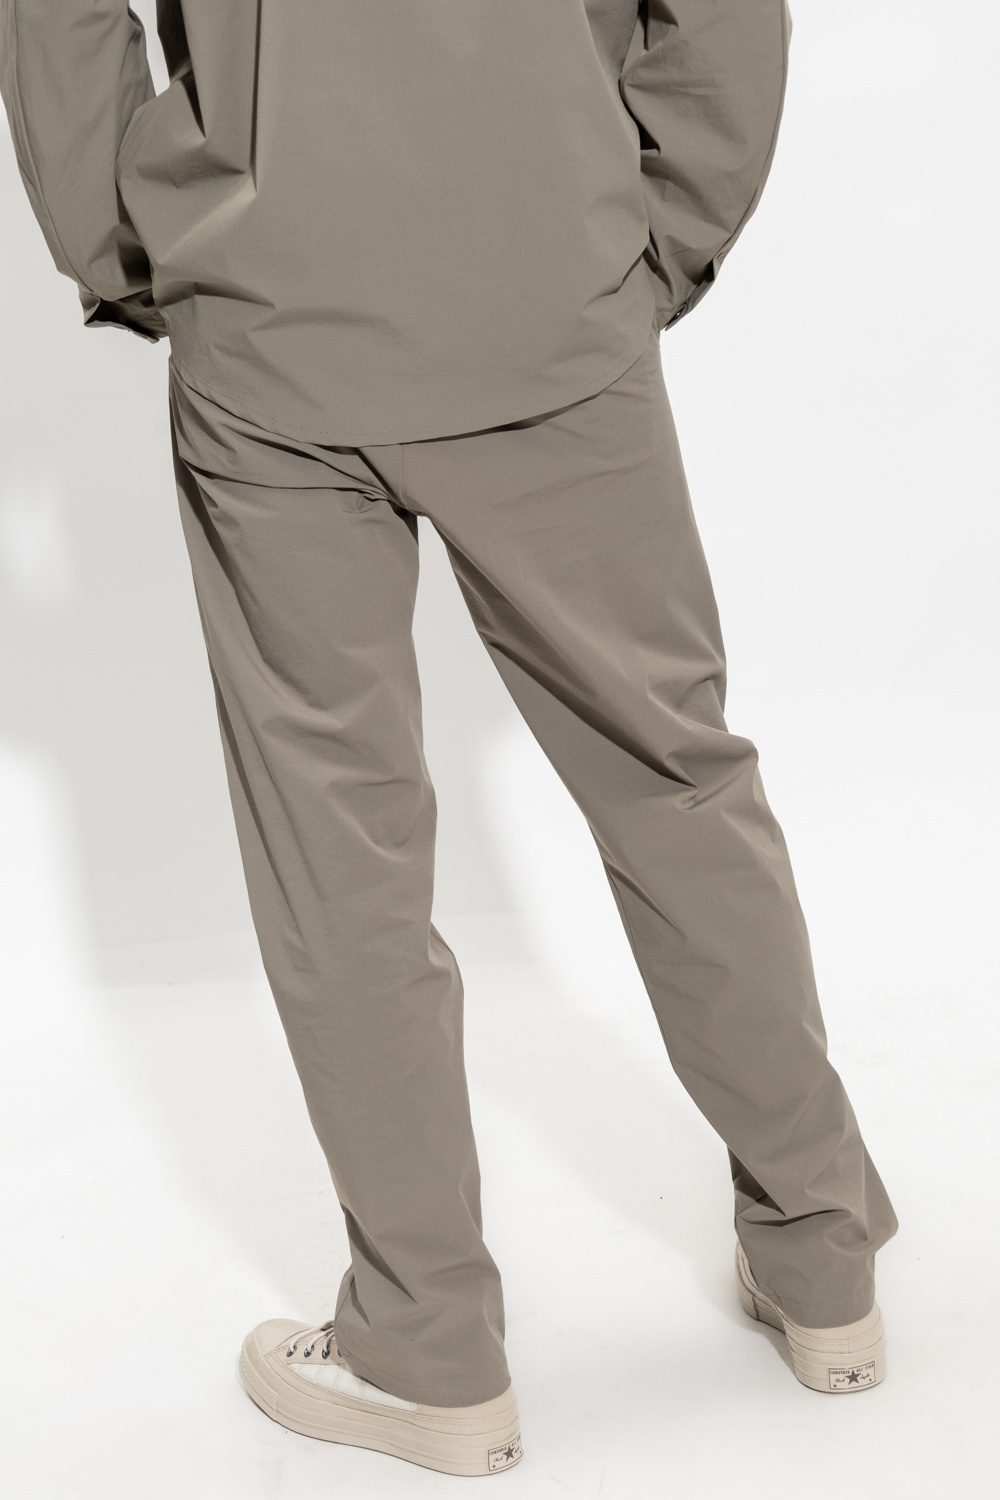 Norse Projects ‘Aaren’ alta trousers